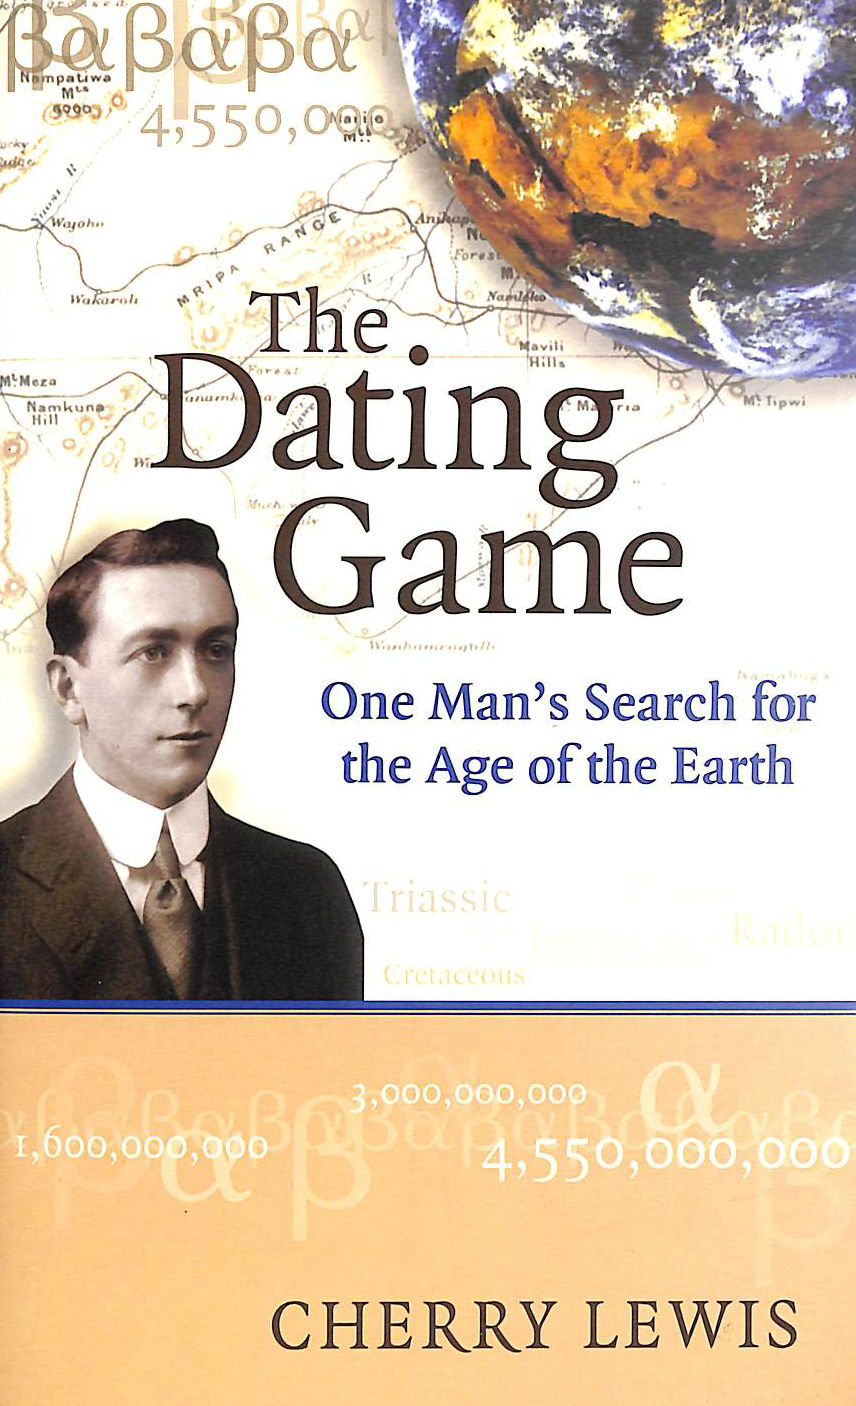 LEWIS, CHERRY - The Dating Game: One Man's Search for the Age of the Earth